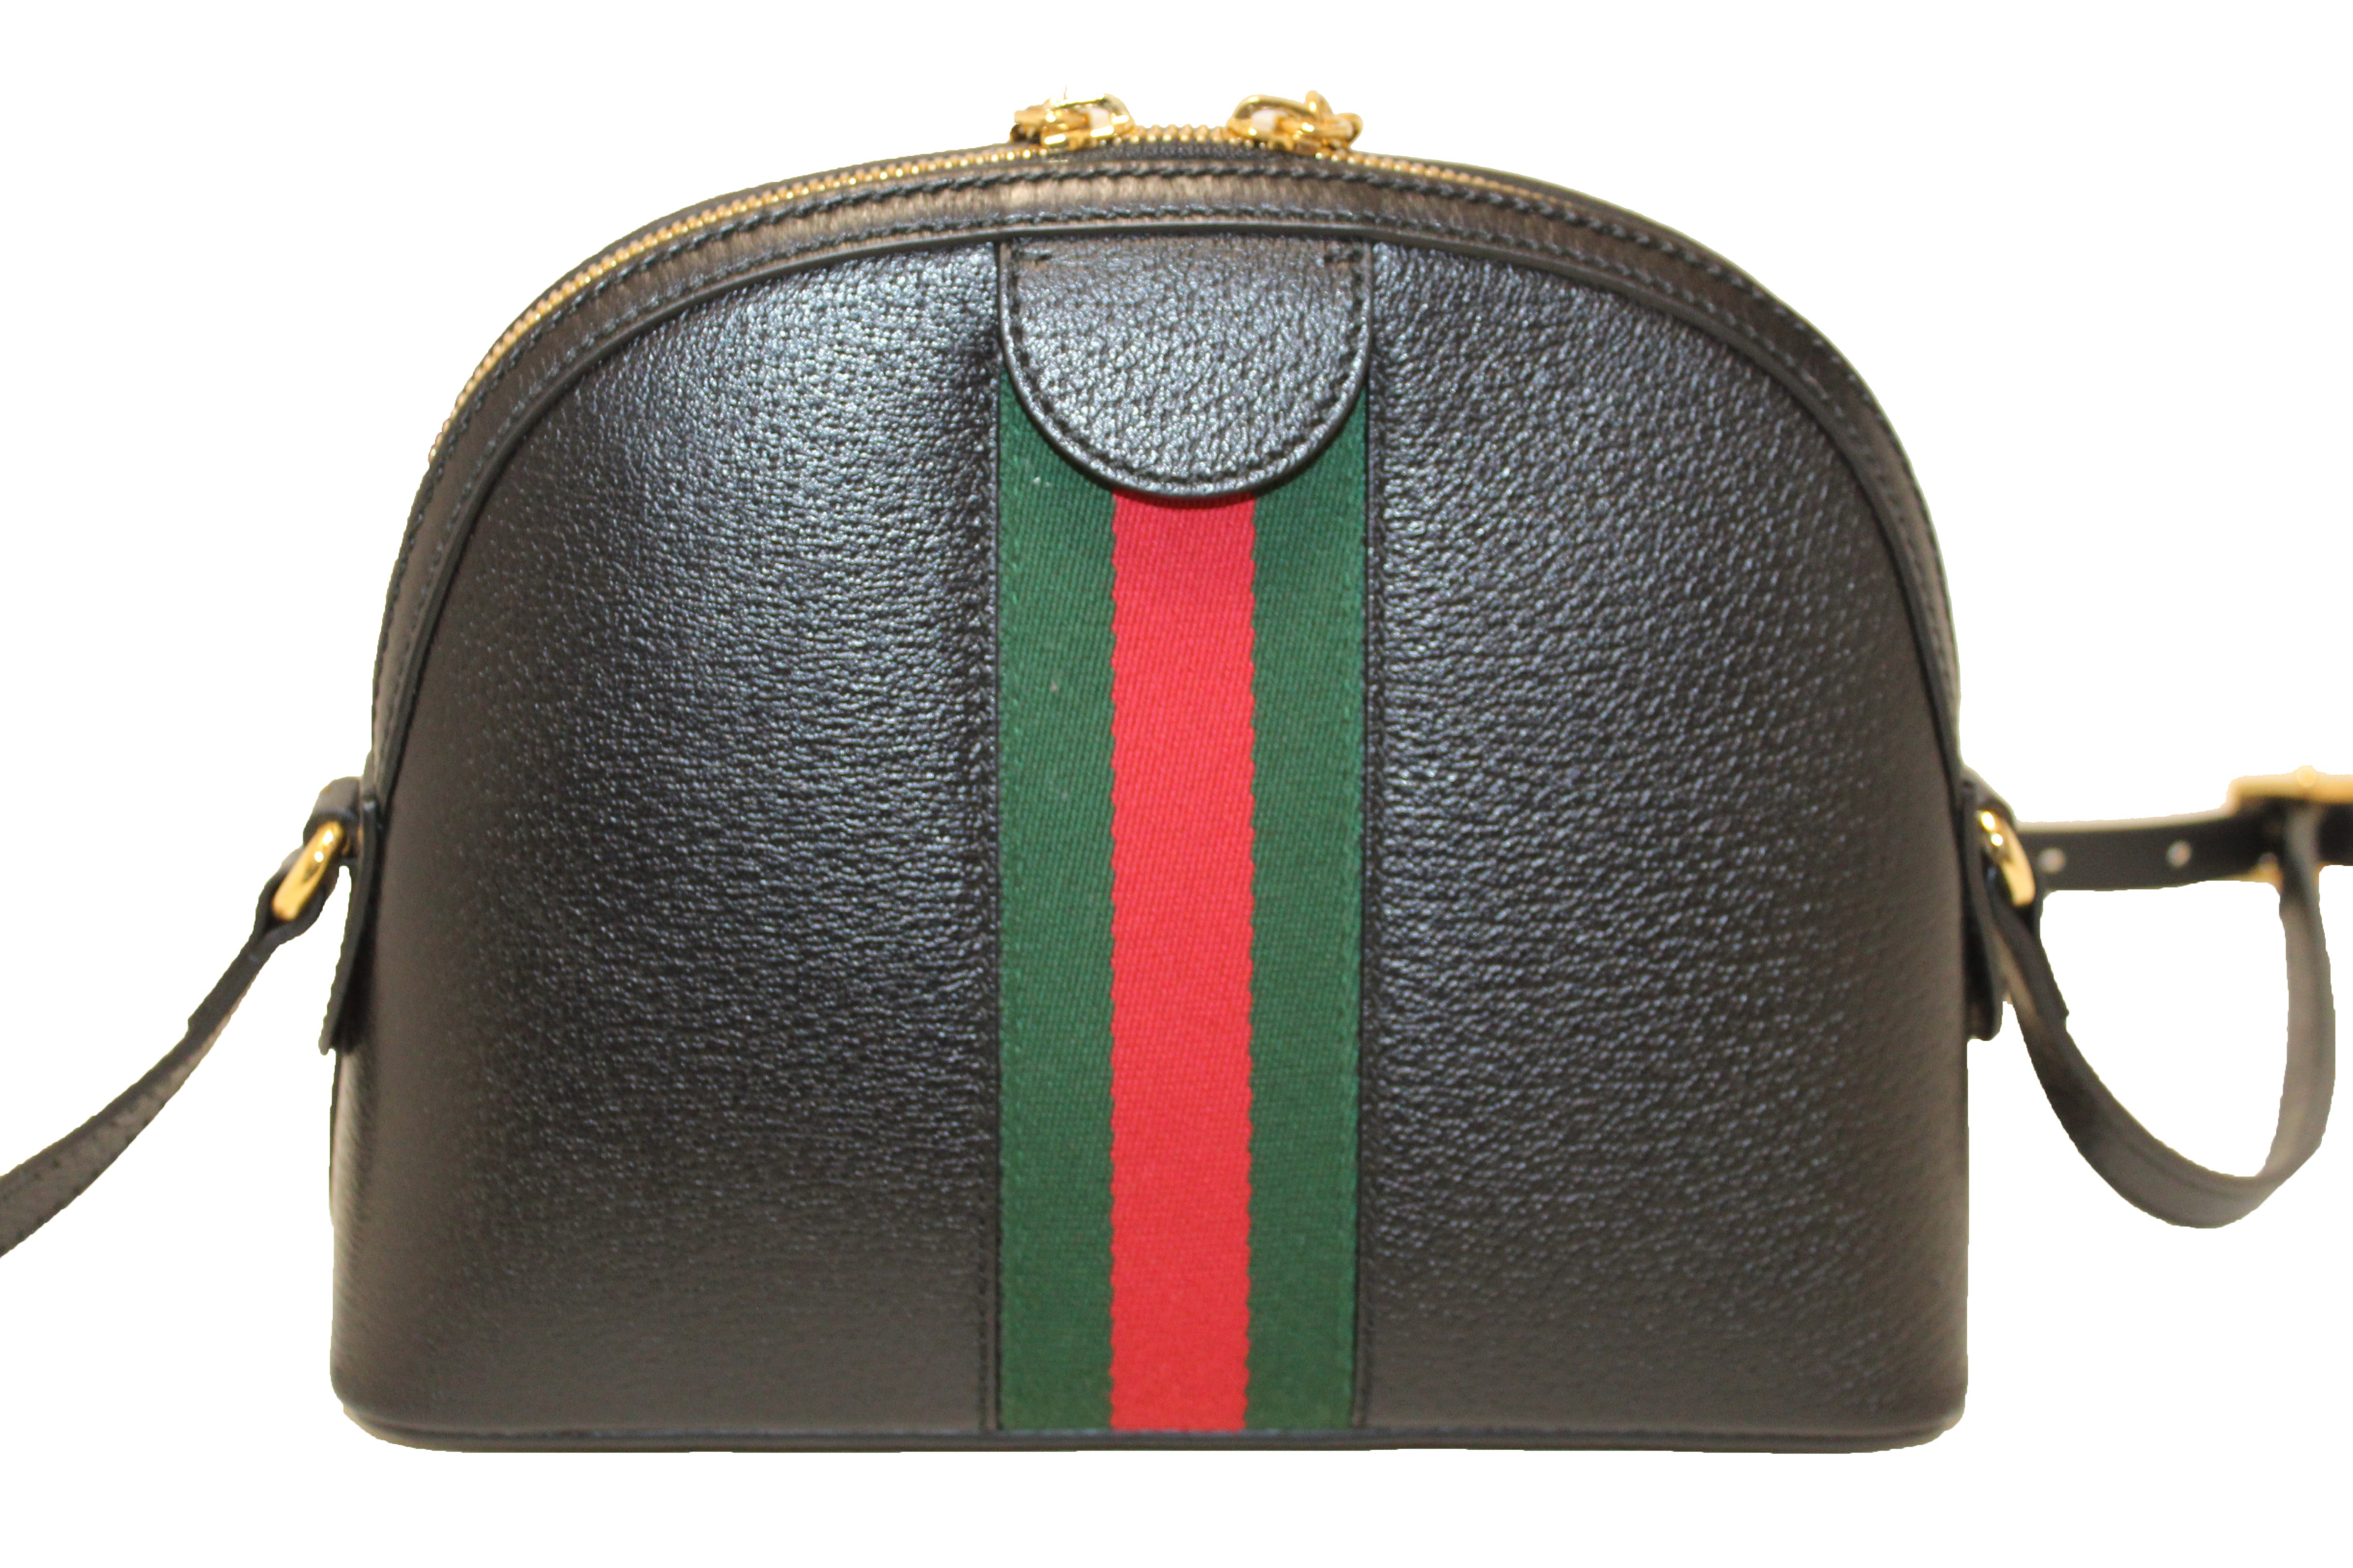 Authentic Gucci Black Calfskin Leather Web GG Small Ophidia Dome Shoulder Bag